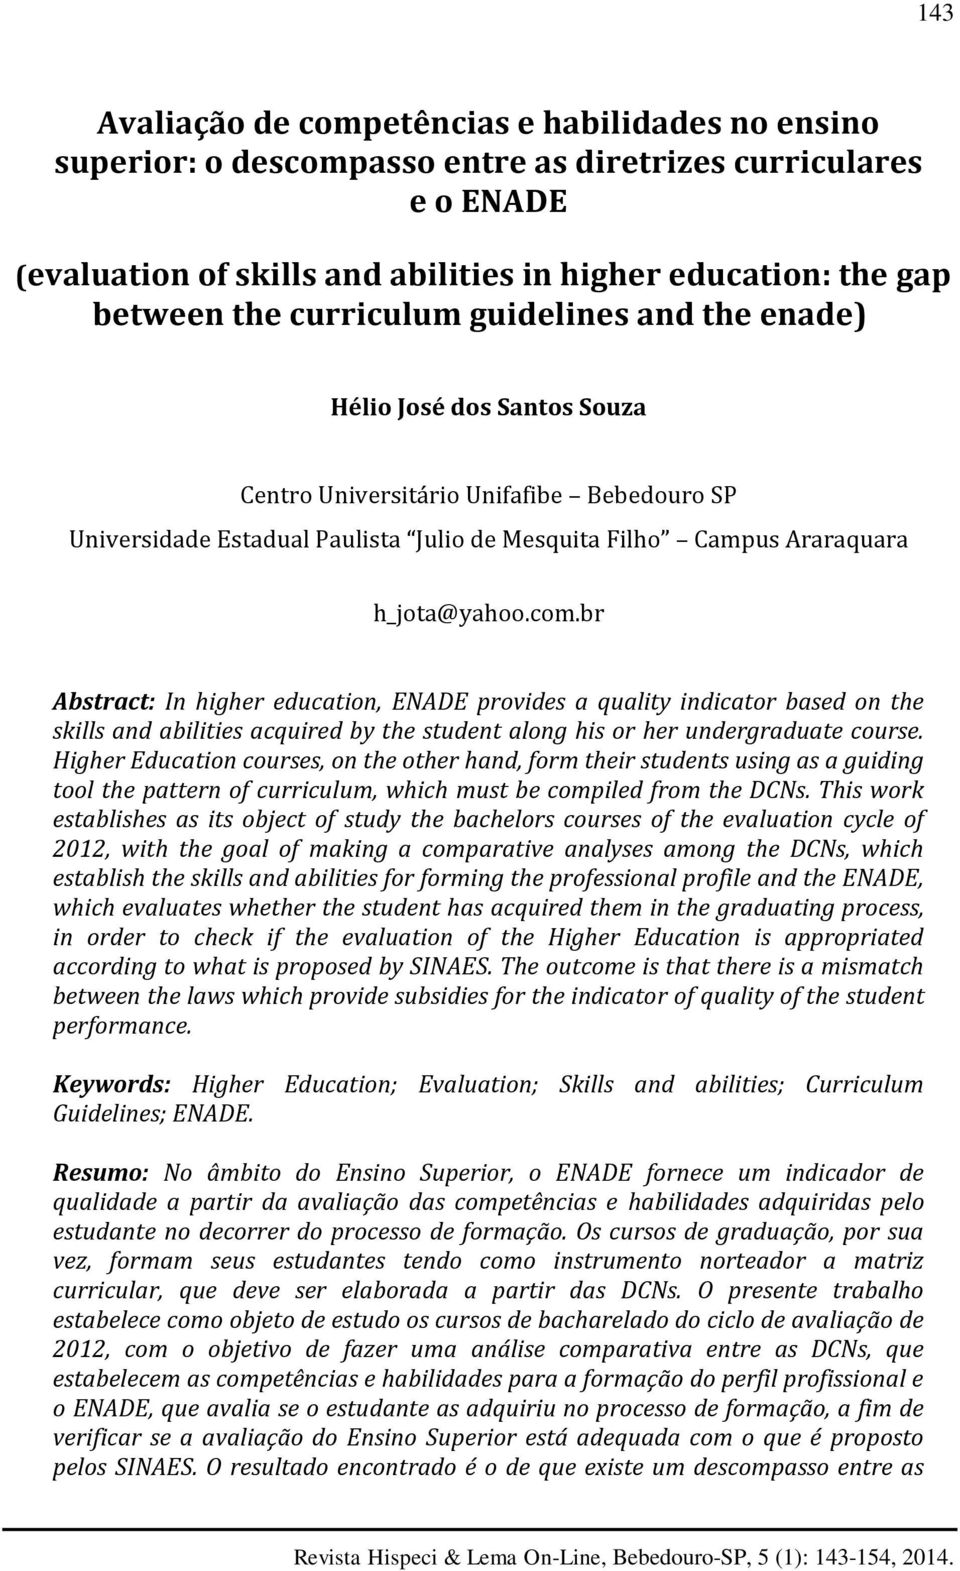 br Abstract: In higher education, ENADE provides a quality indicator based on the skills and abilities acquired by the student along his or her undergraduate course.